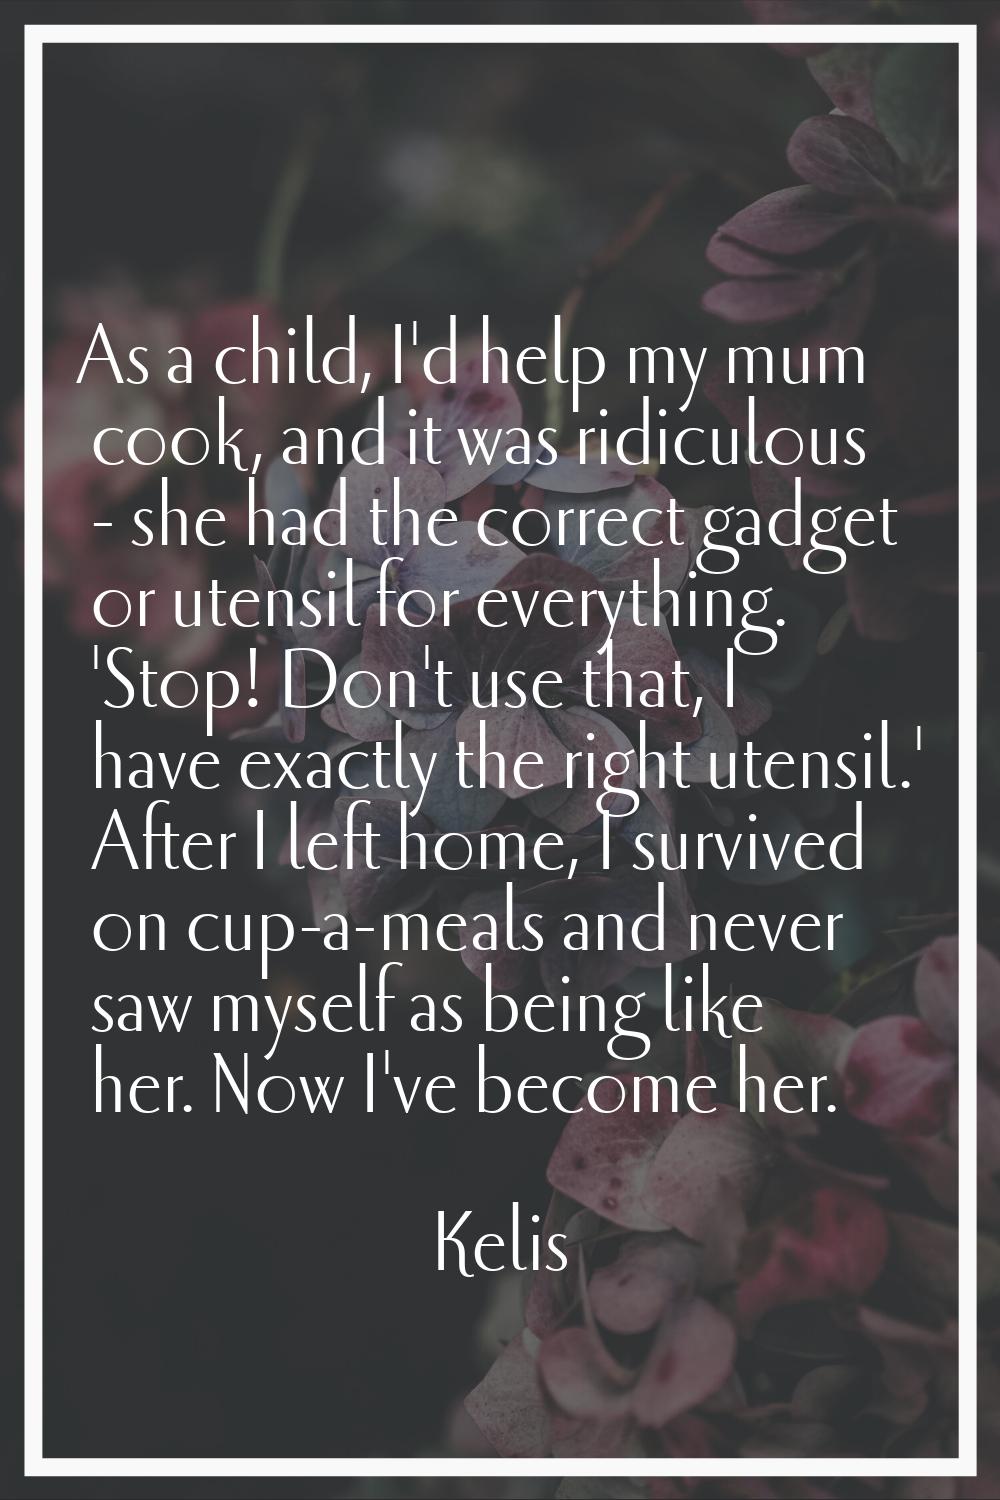 As a child, I'd help my mum cook, and it was ridiculous - she had the correct gadget or utensil for